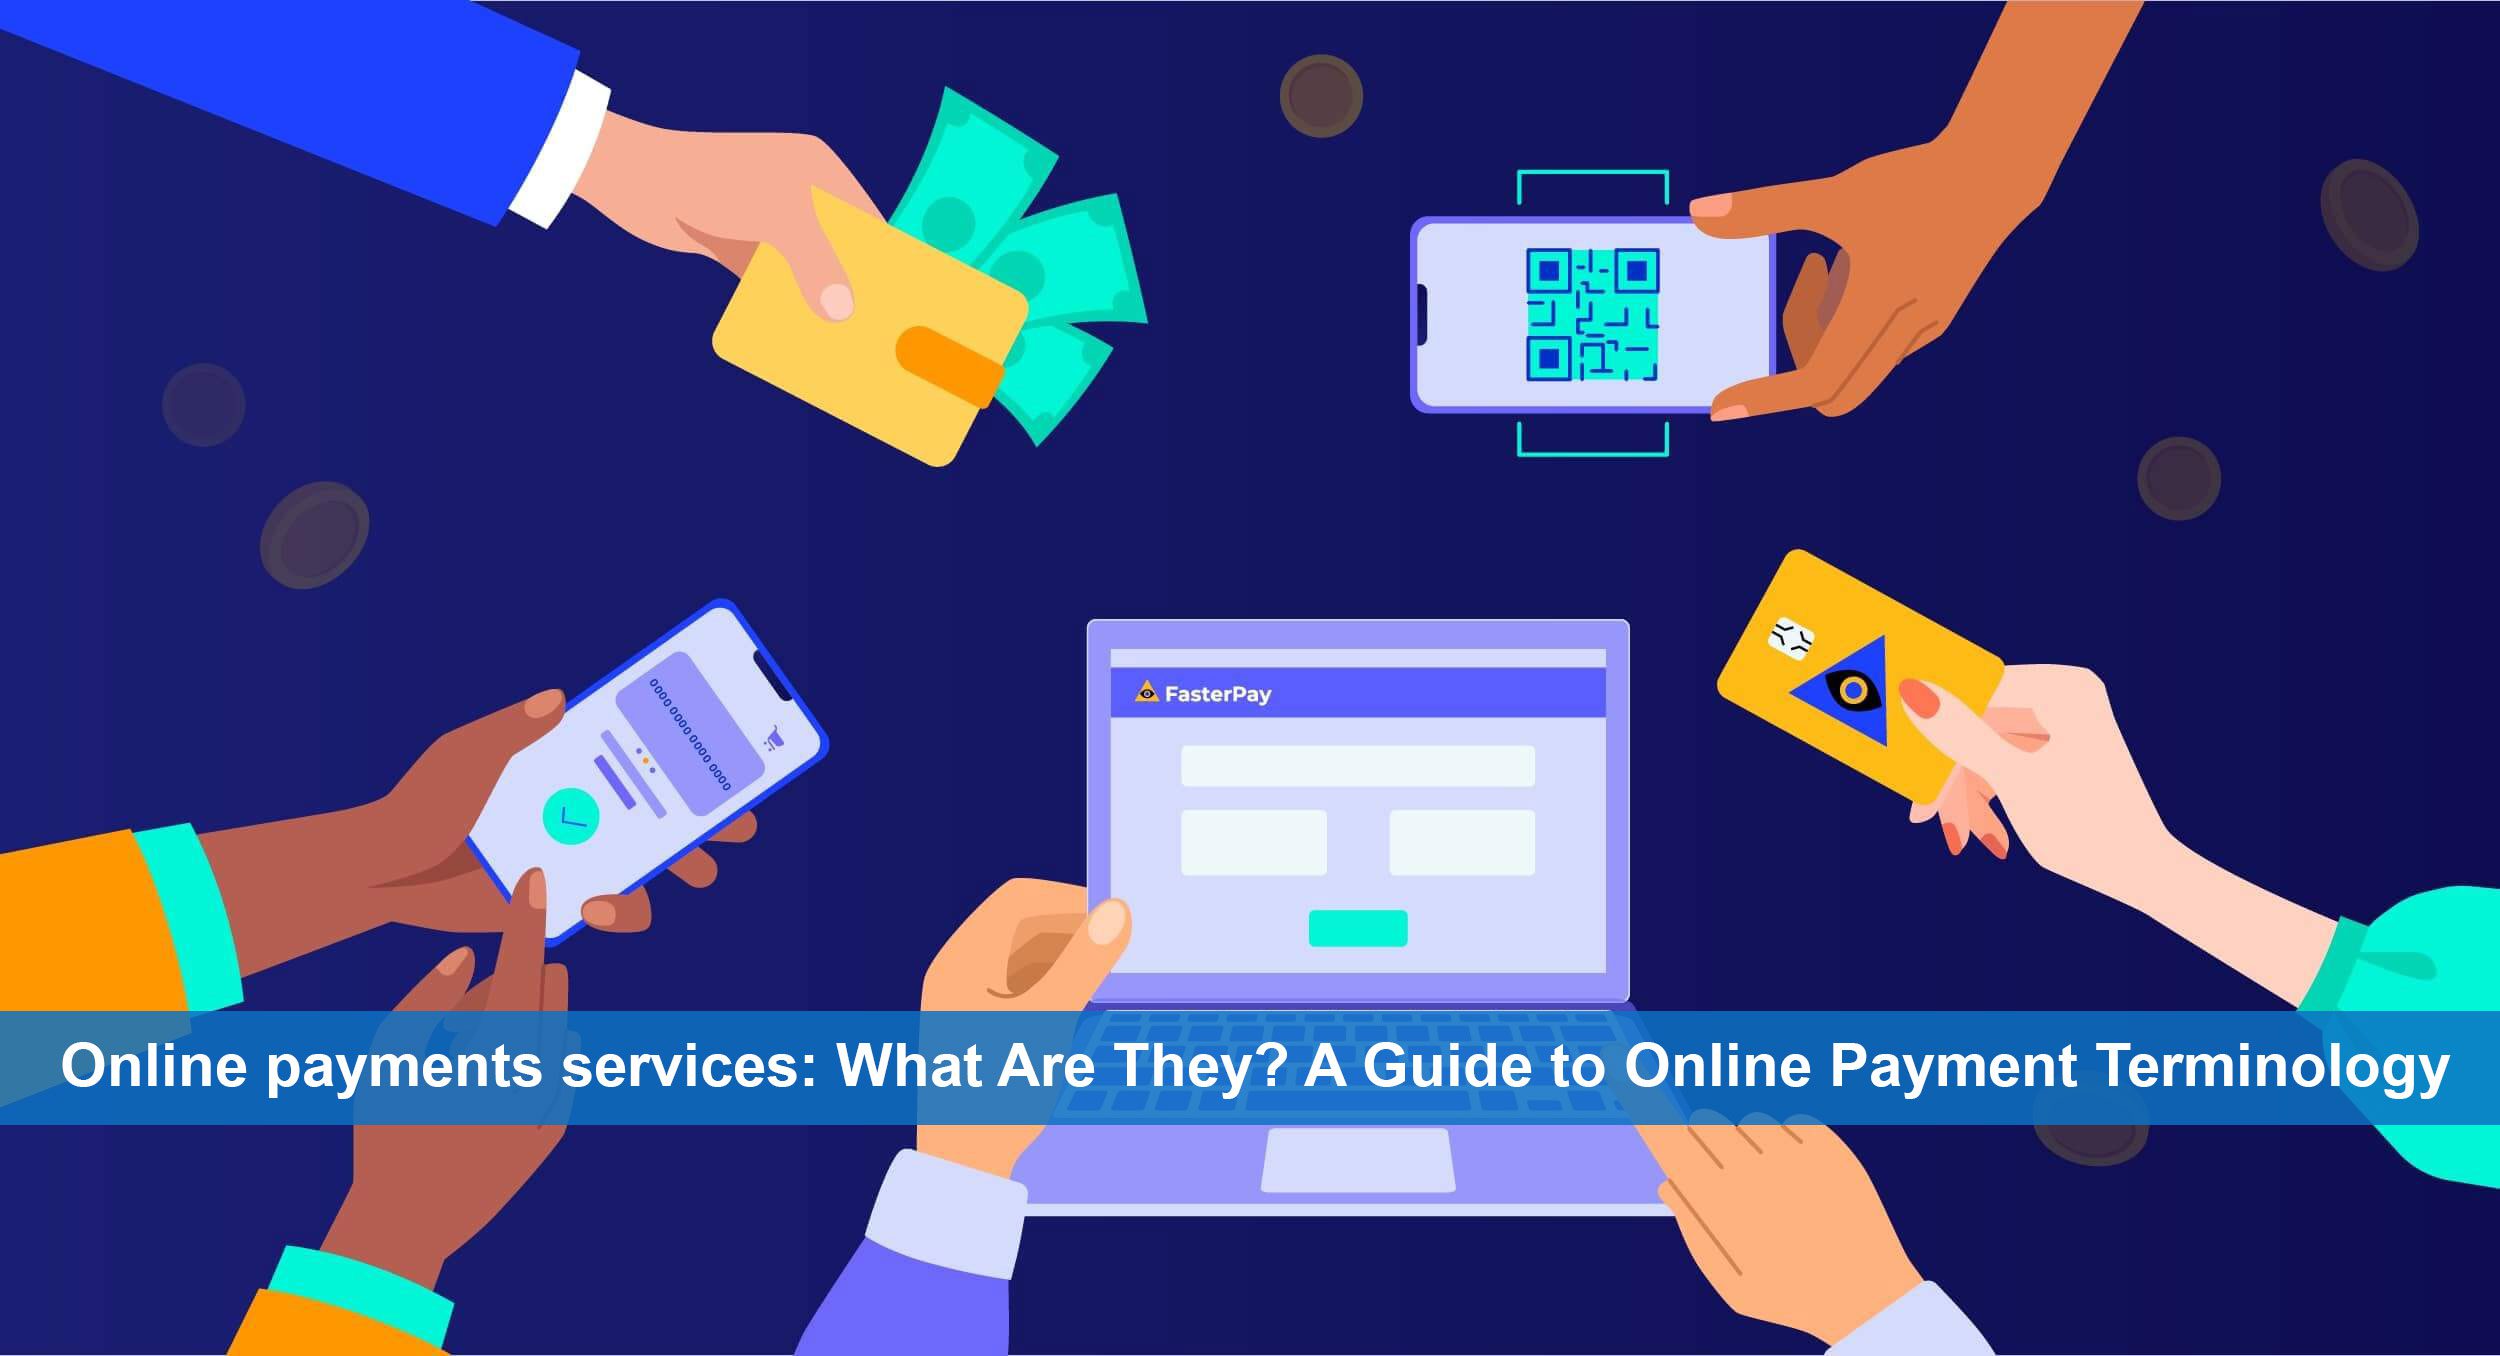 Online payments services: What Are They? A Guide to Online Payment Terminology